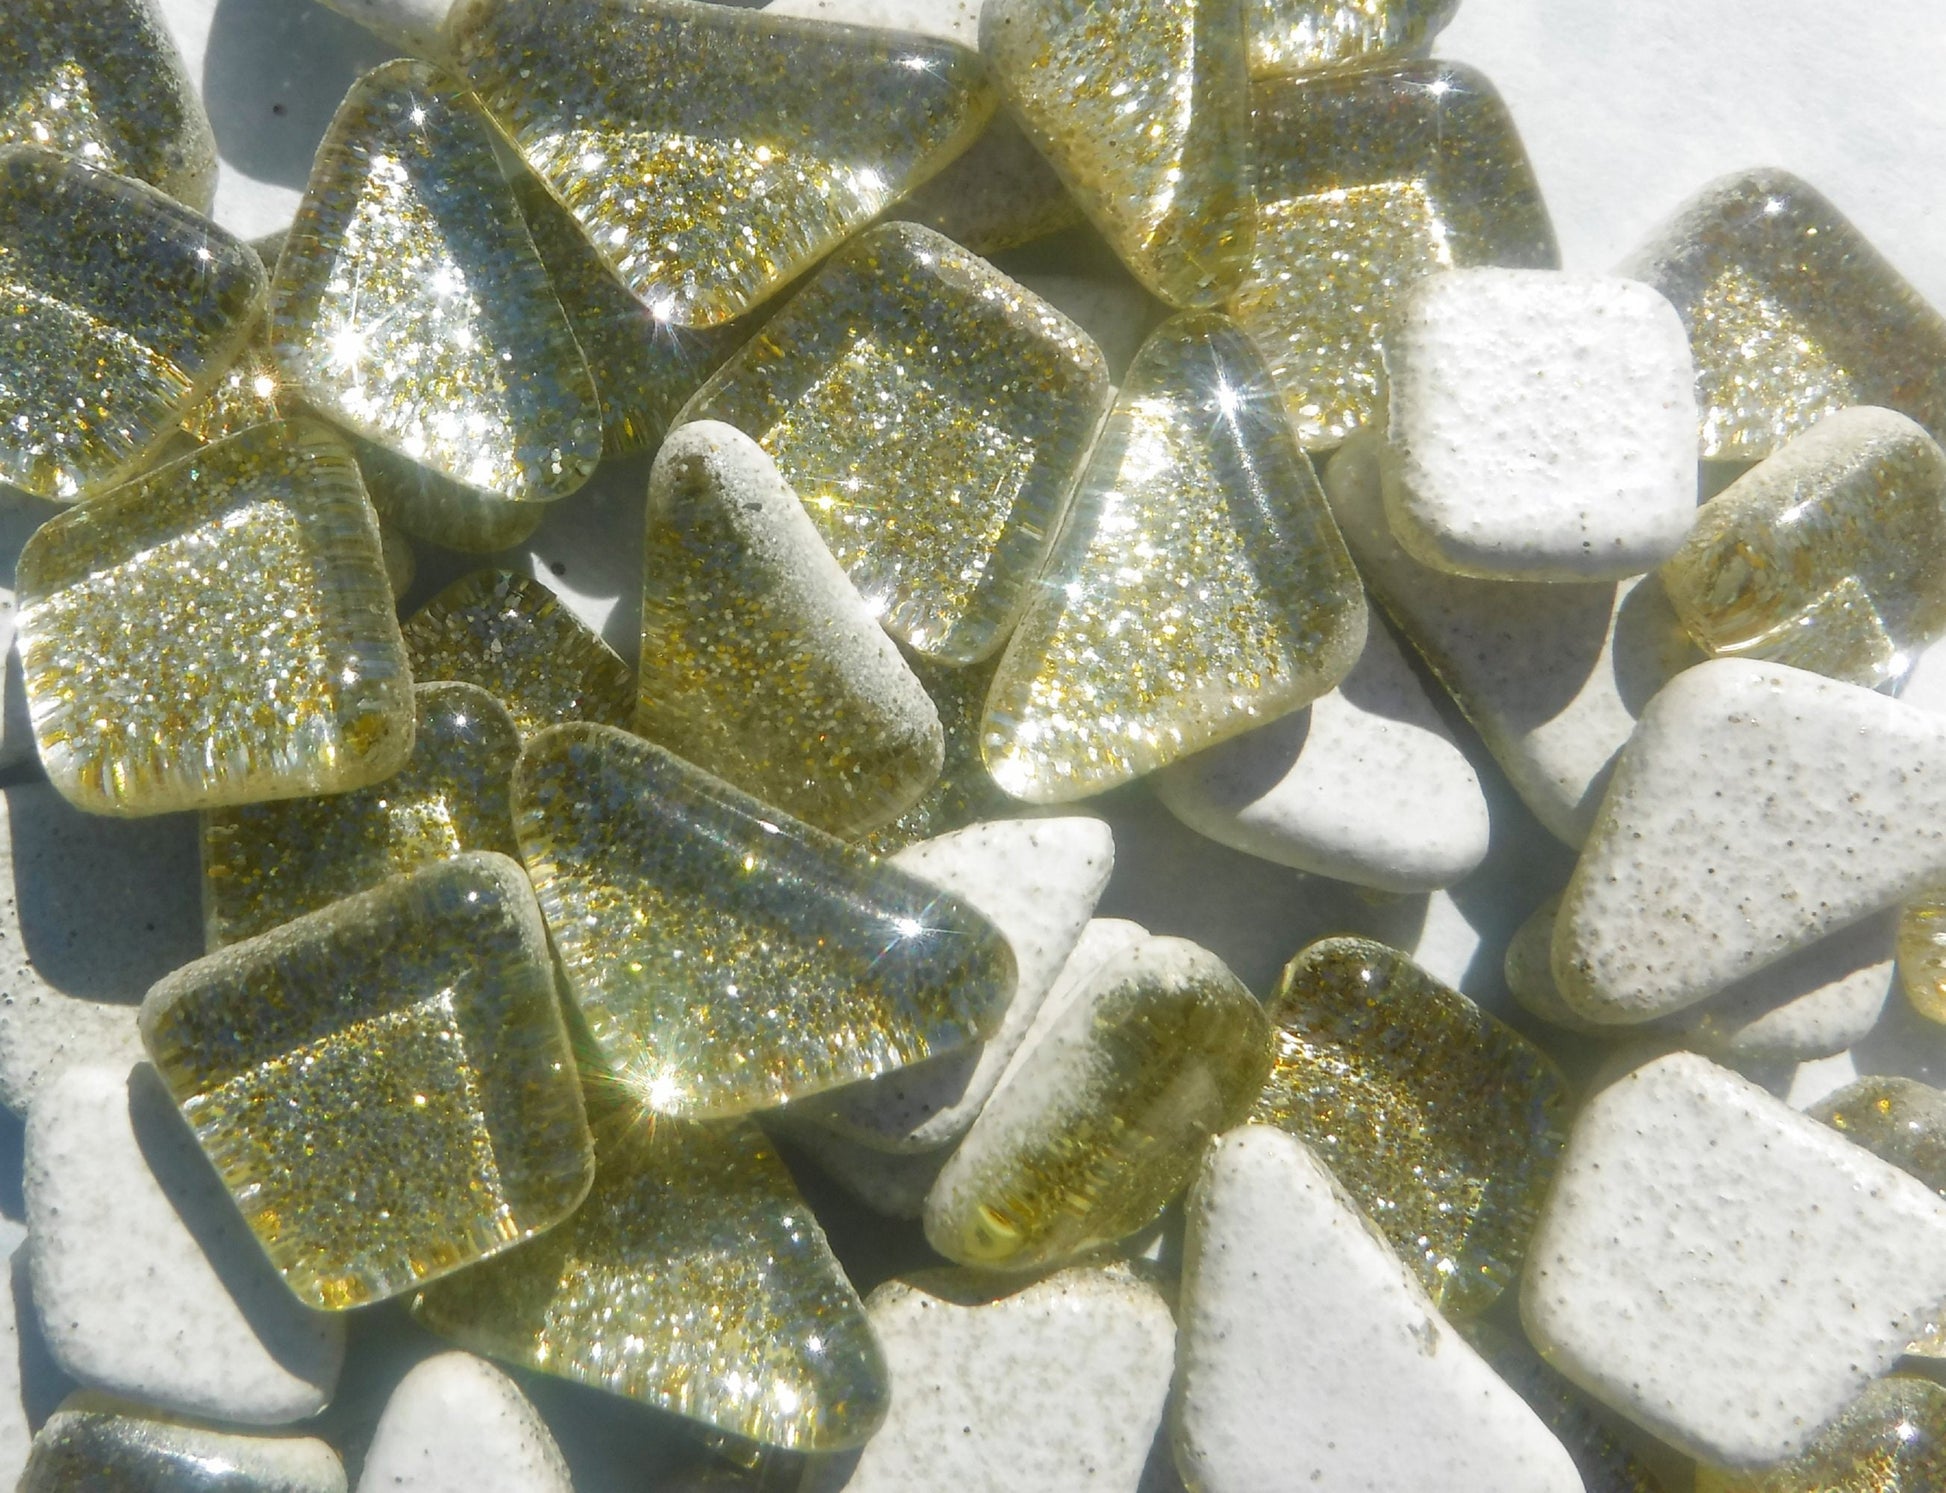 Gold and Silver Glitter Puzzle Tiles - 100 grams in Assorted Shapes Glass Mosaic Tiles - Cafe Au Lait